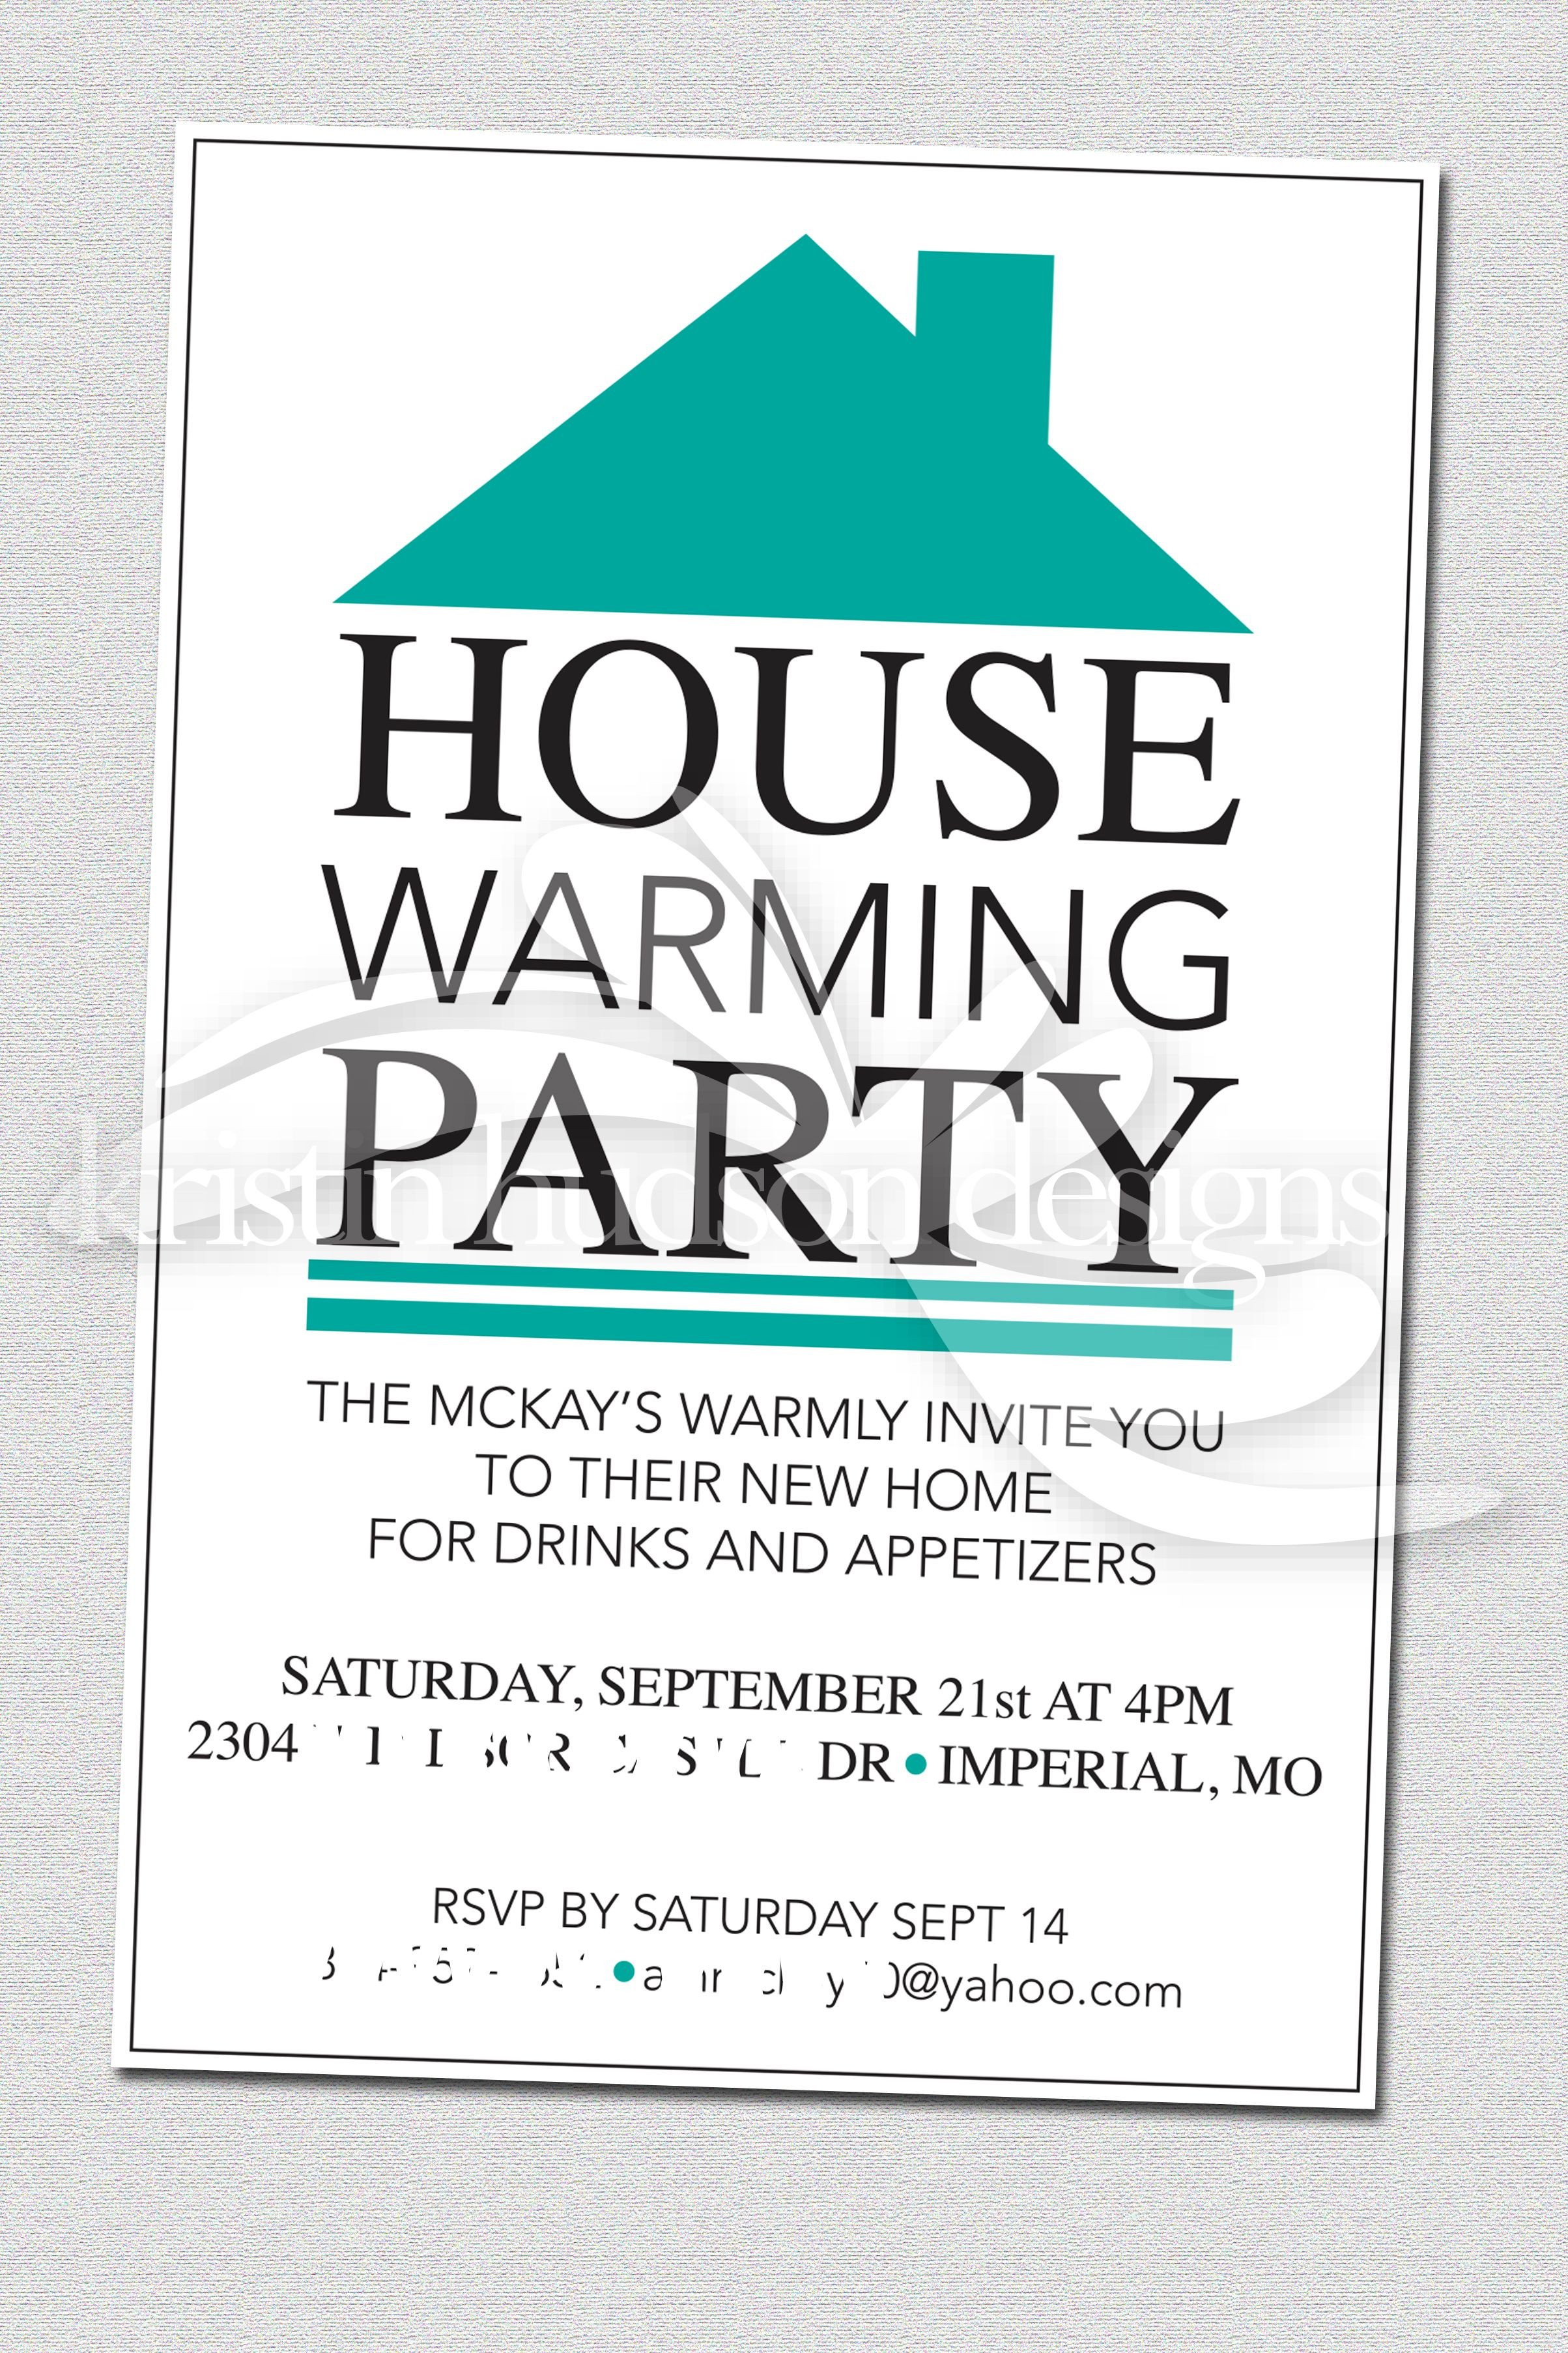 Housewarming Party Invitations Templates House Warming Party Invite